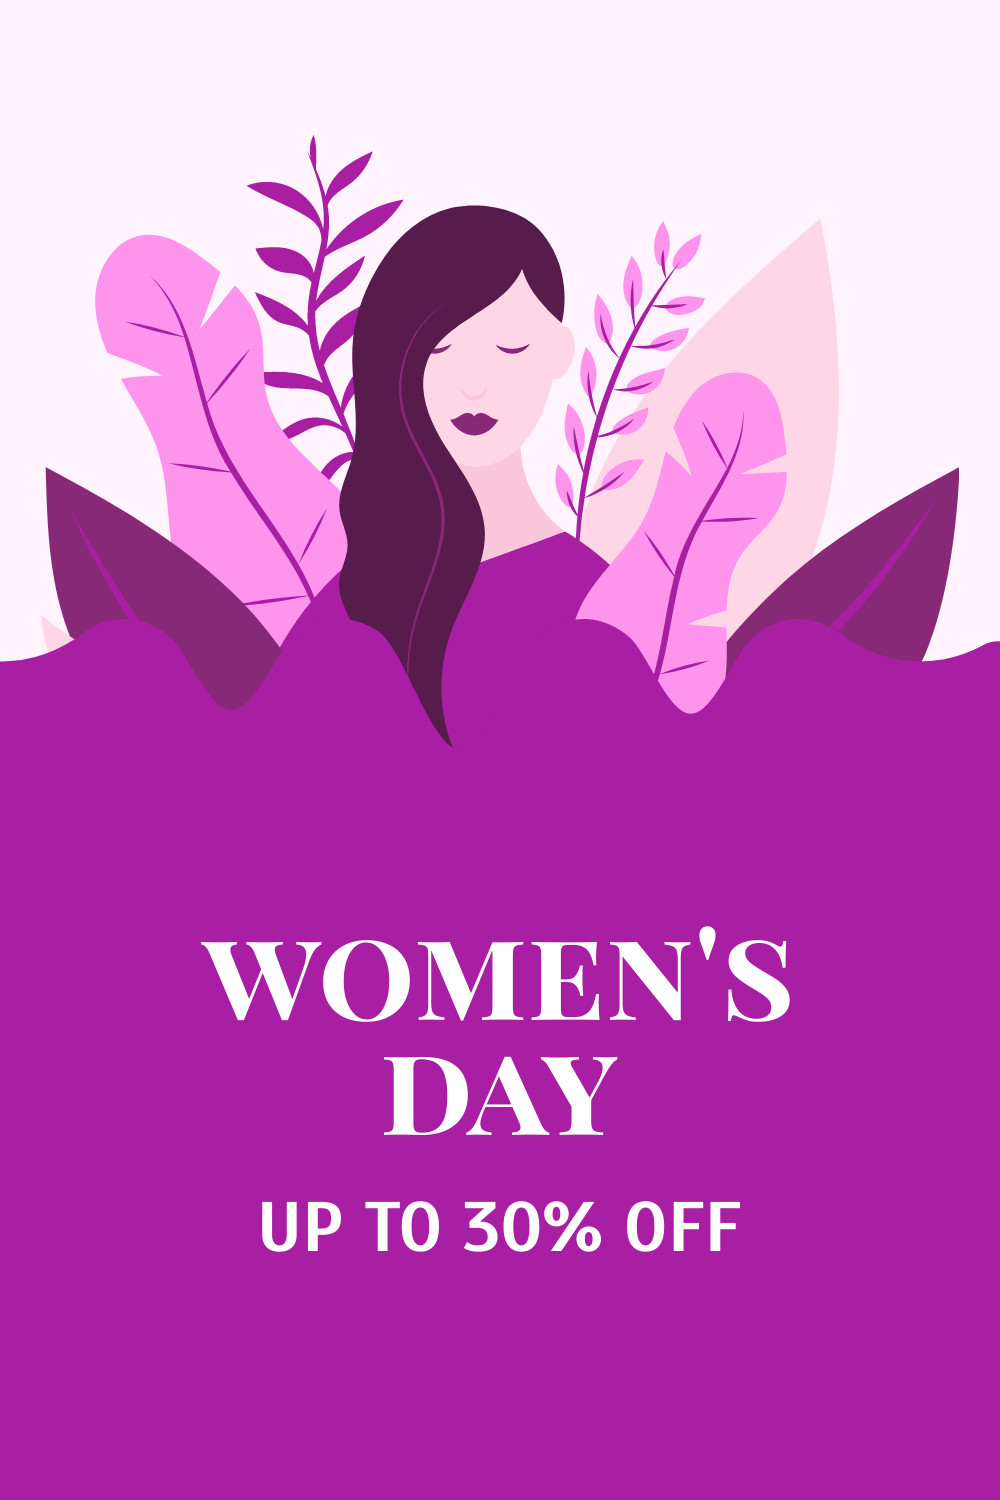 Purple Illustration Women's Day Facebook Cover 820x360